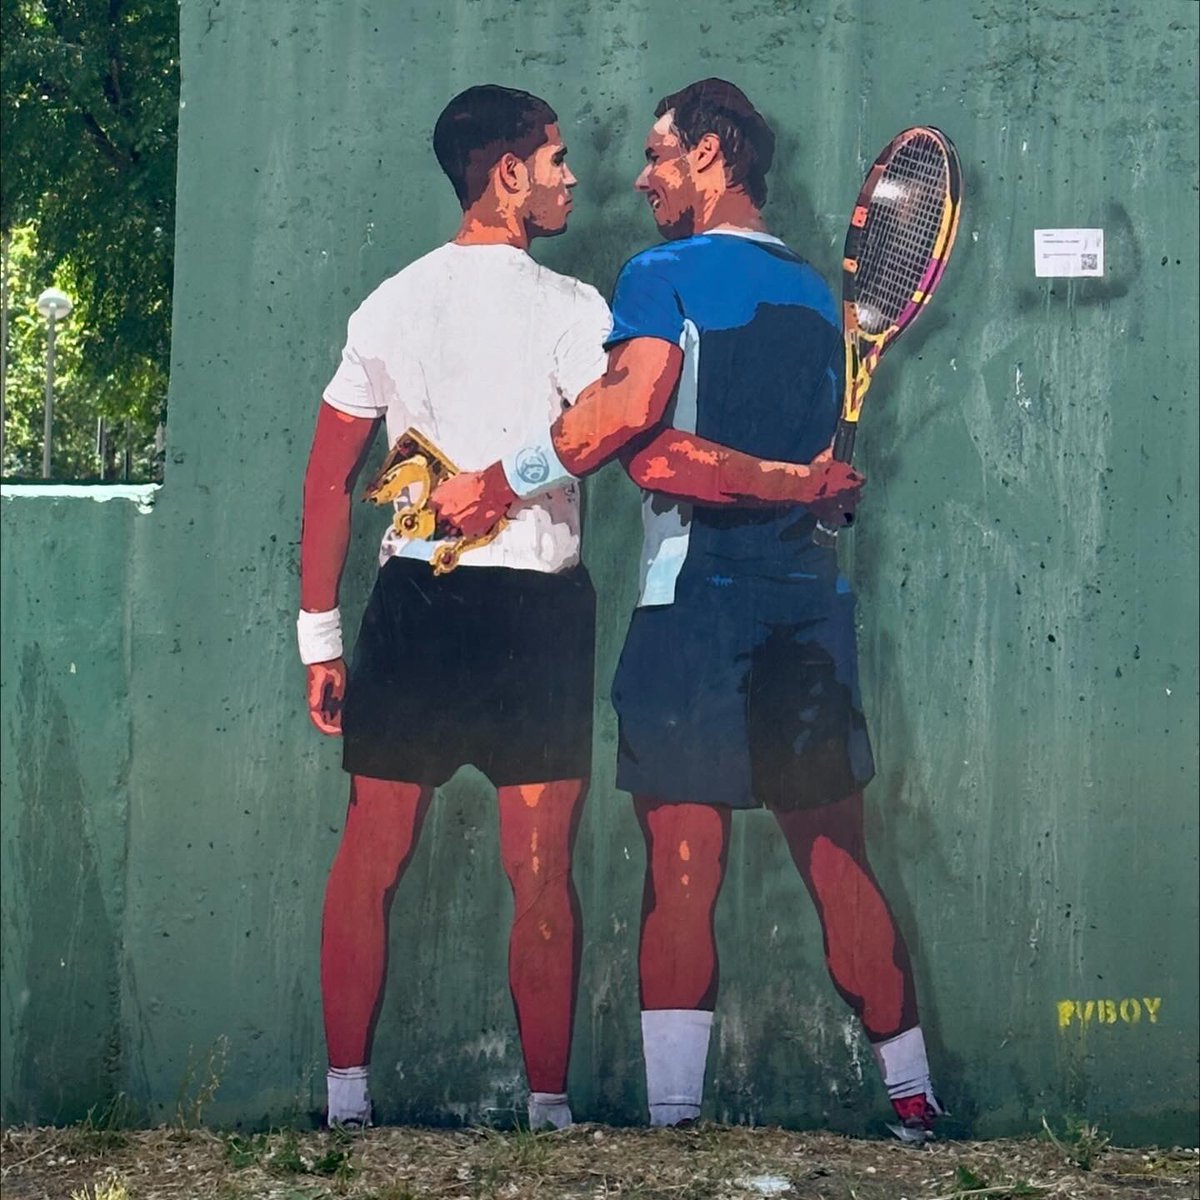 Carlos Alcaraz had the chance to pass Rafa Nadal’s record today for the longest win streak in Madrid. 

But instead, they stay tied at 14 wins.

In a way, it’s poetic for them to share this accomplishment.

Rafa gave so much to Spanish tennis.

Carlos is on his journey to do the